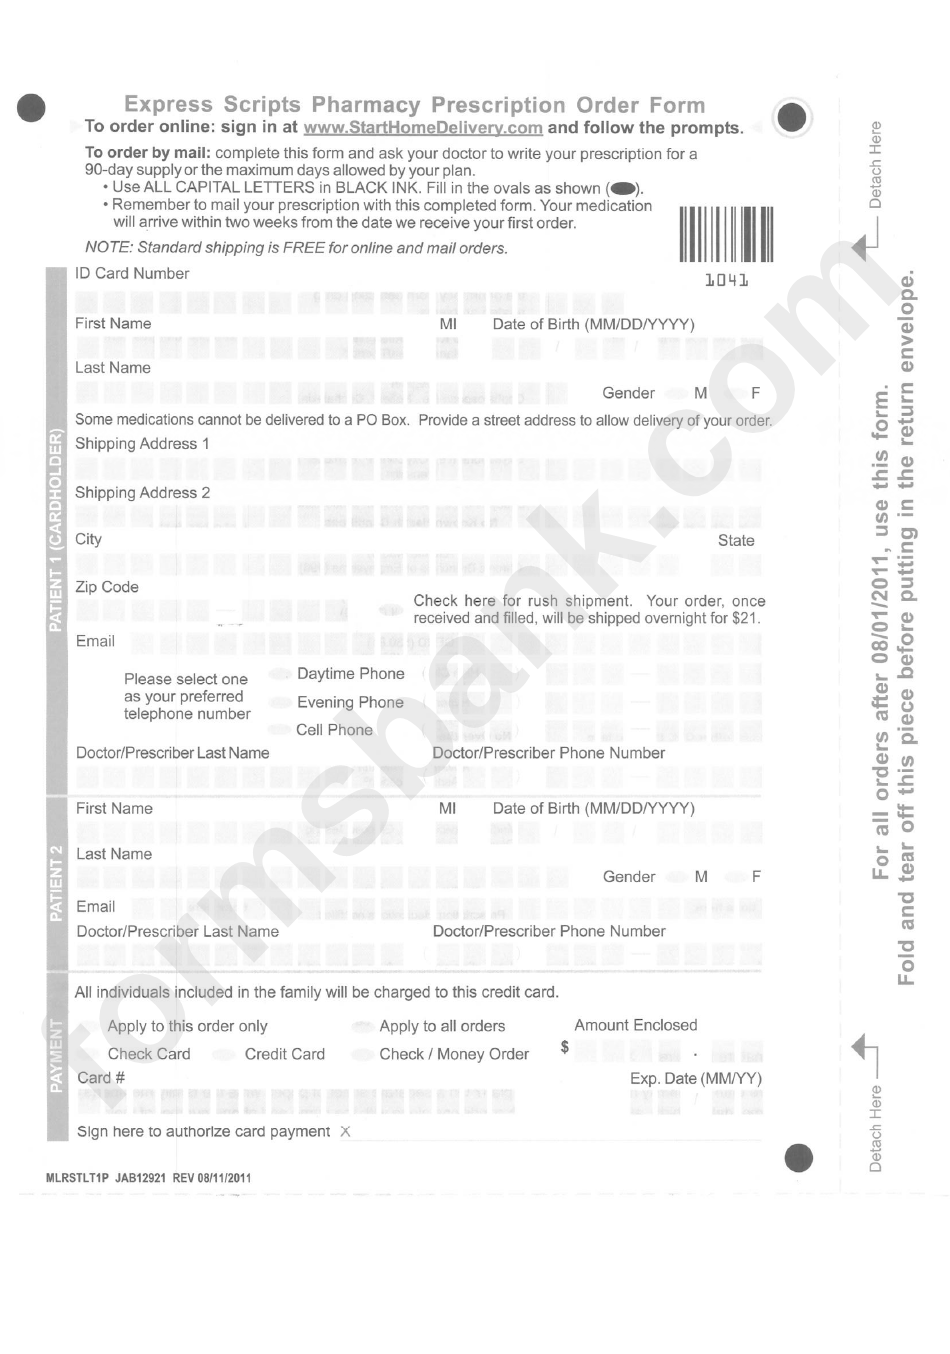 home delivery order form express scripts